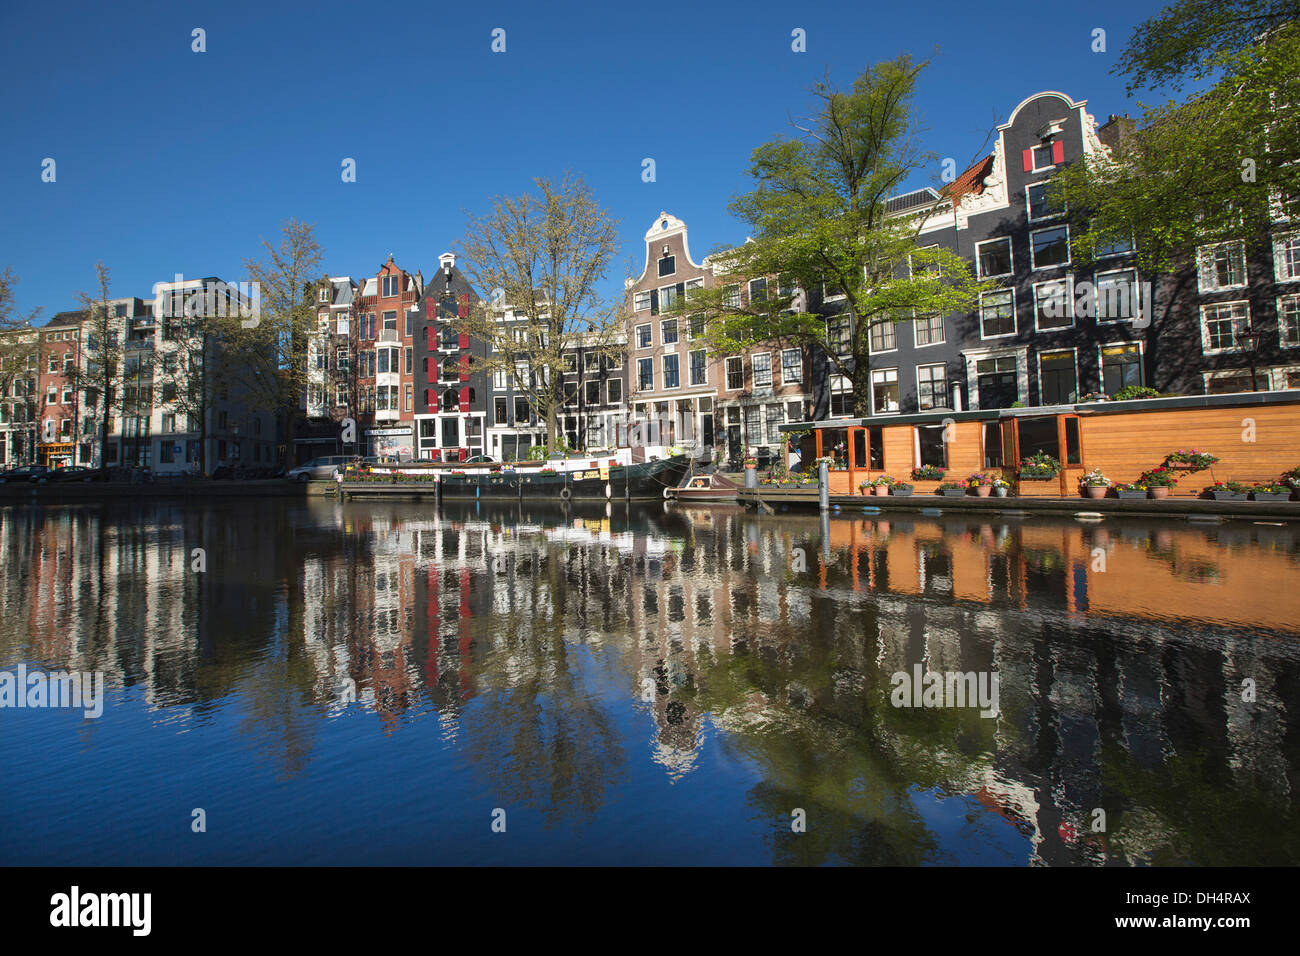 Netherlands, Amsterdam, 17th century houses and houseboats at canal called Prinsengracht. Unesco World Heritage Site Stock Photo